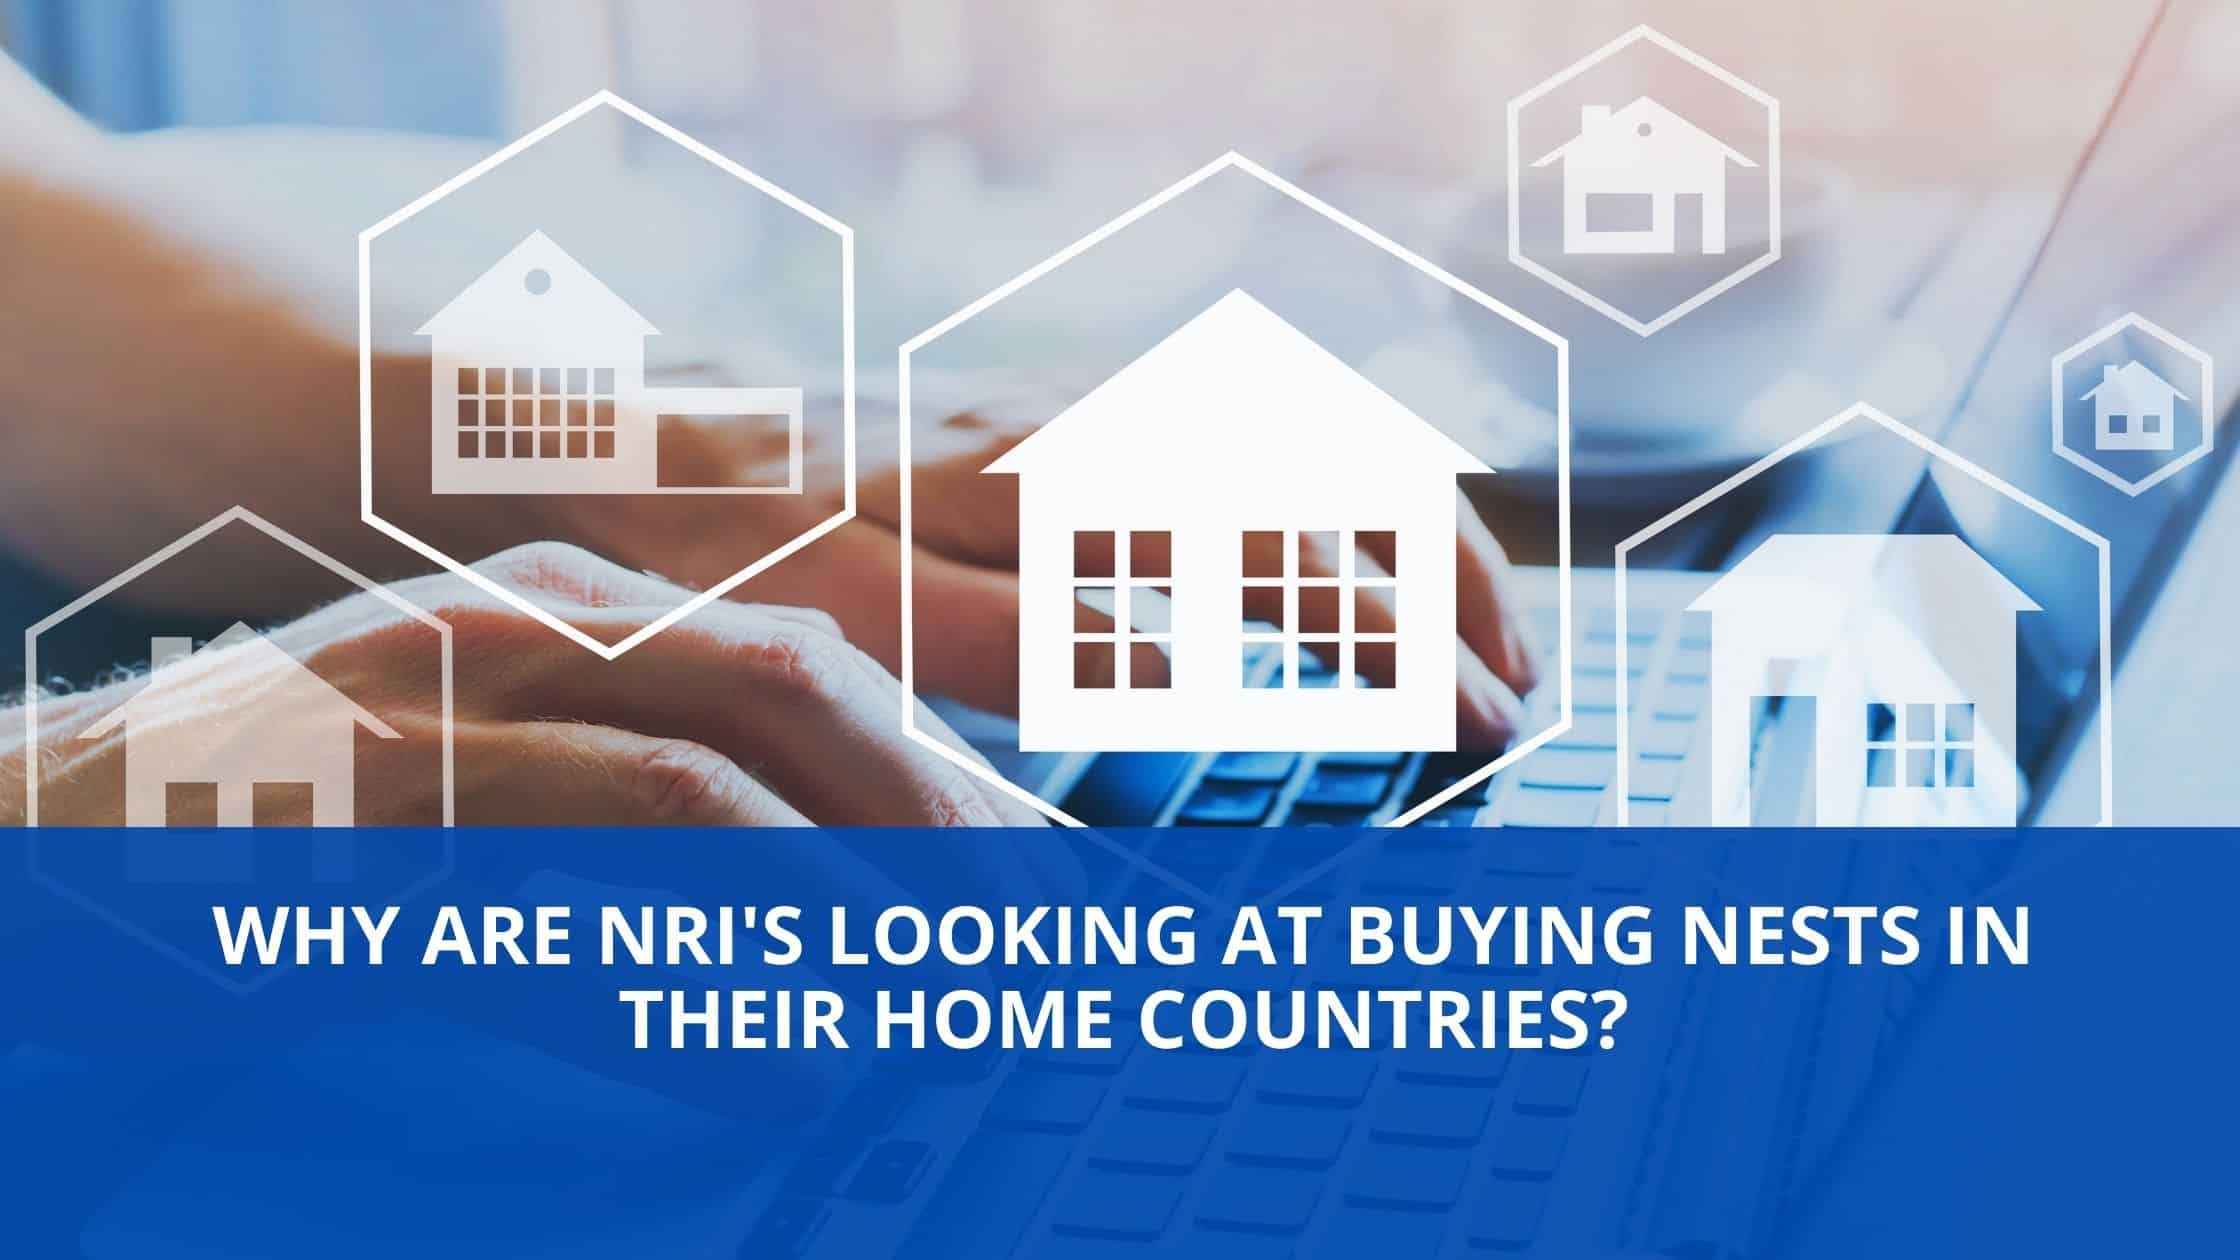 NRIs-looking-at-buying-nests-in-their-home-countries